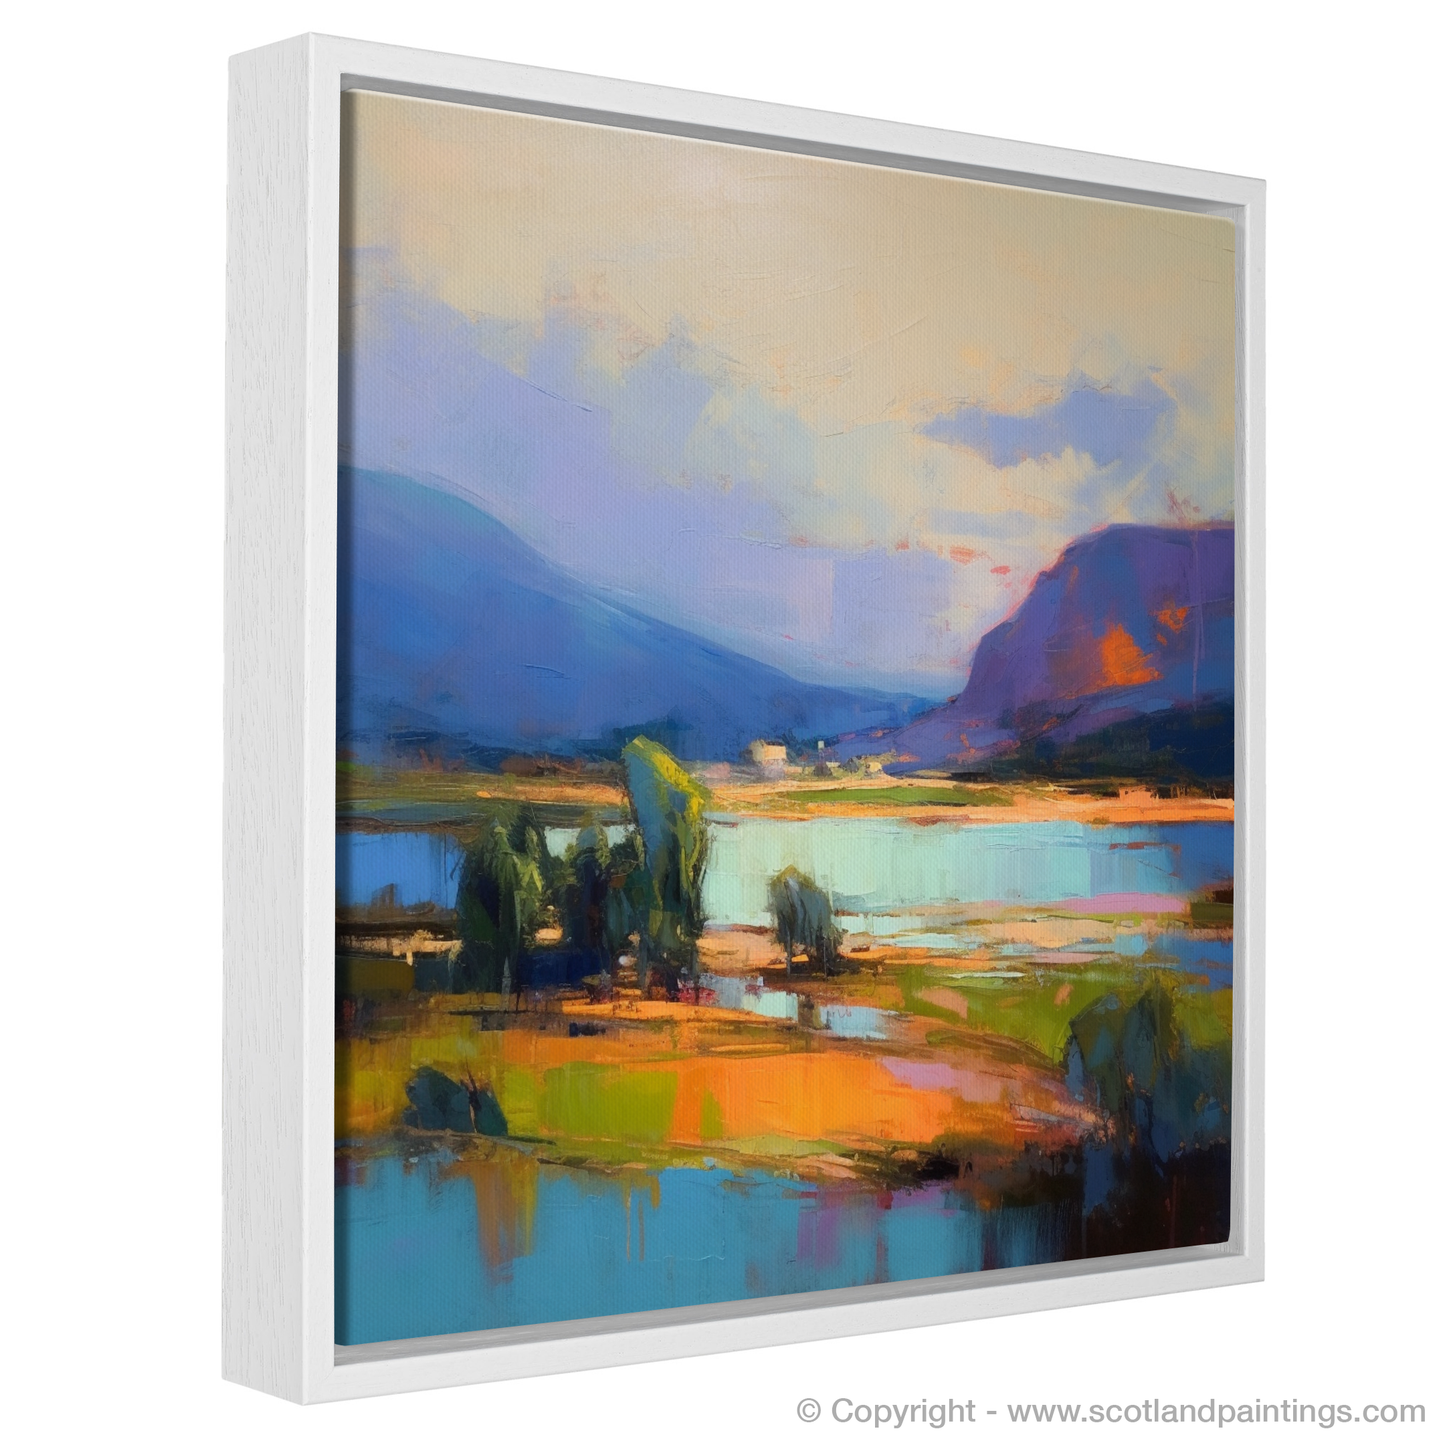 Summer's Embrace: An Expressionist Journey through Loch Tay